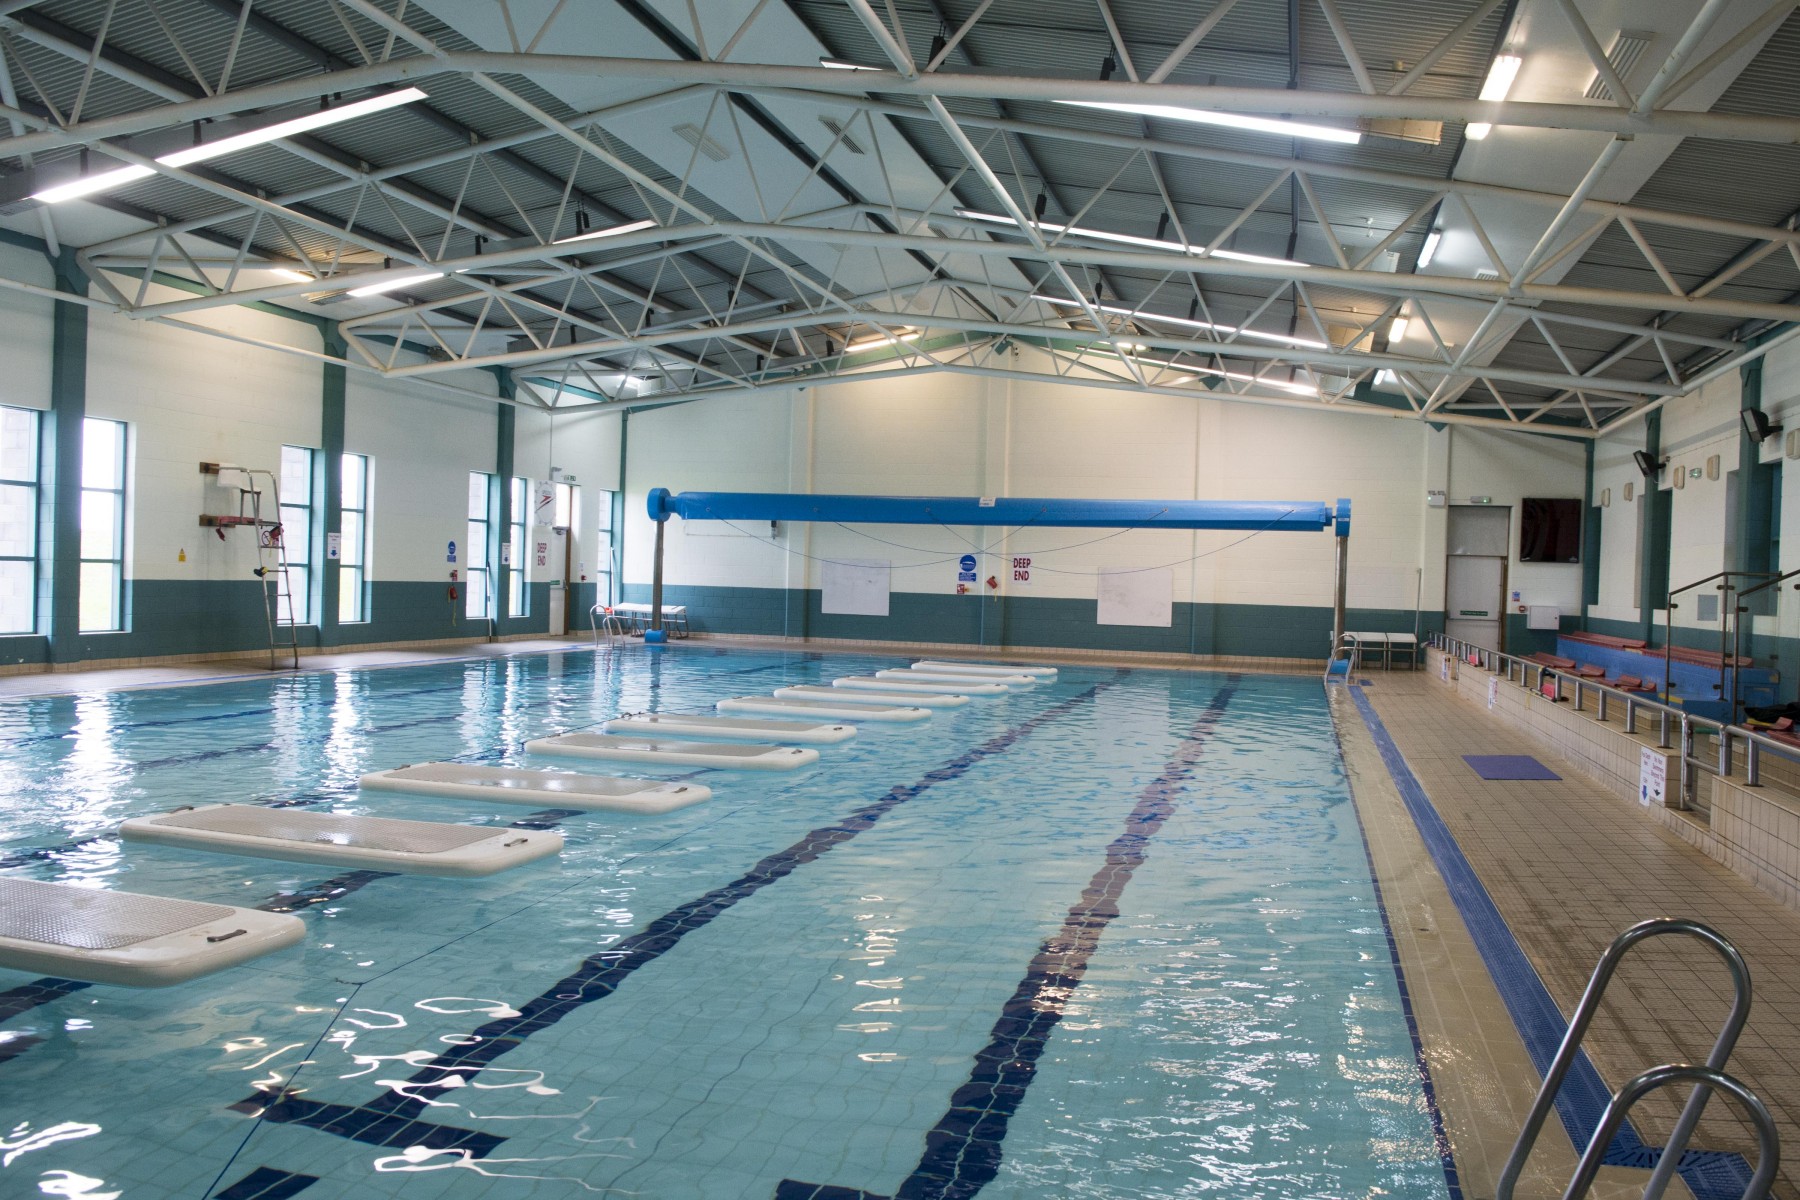 CHAP Group wins £4.8m contract for Aberdeen swimming pool revamp